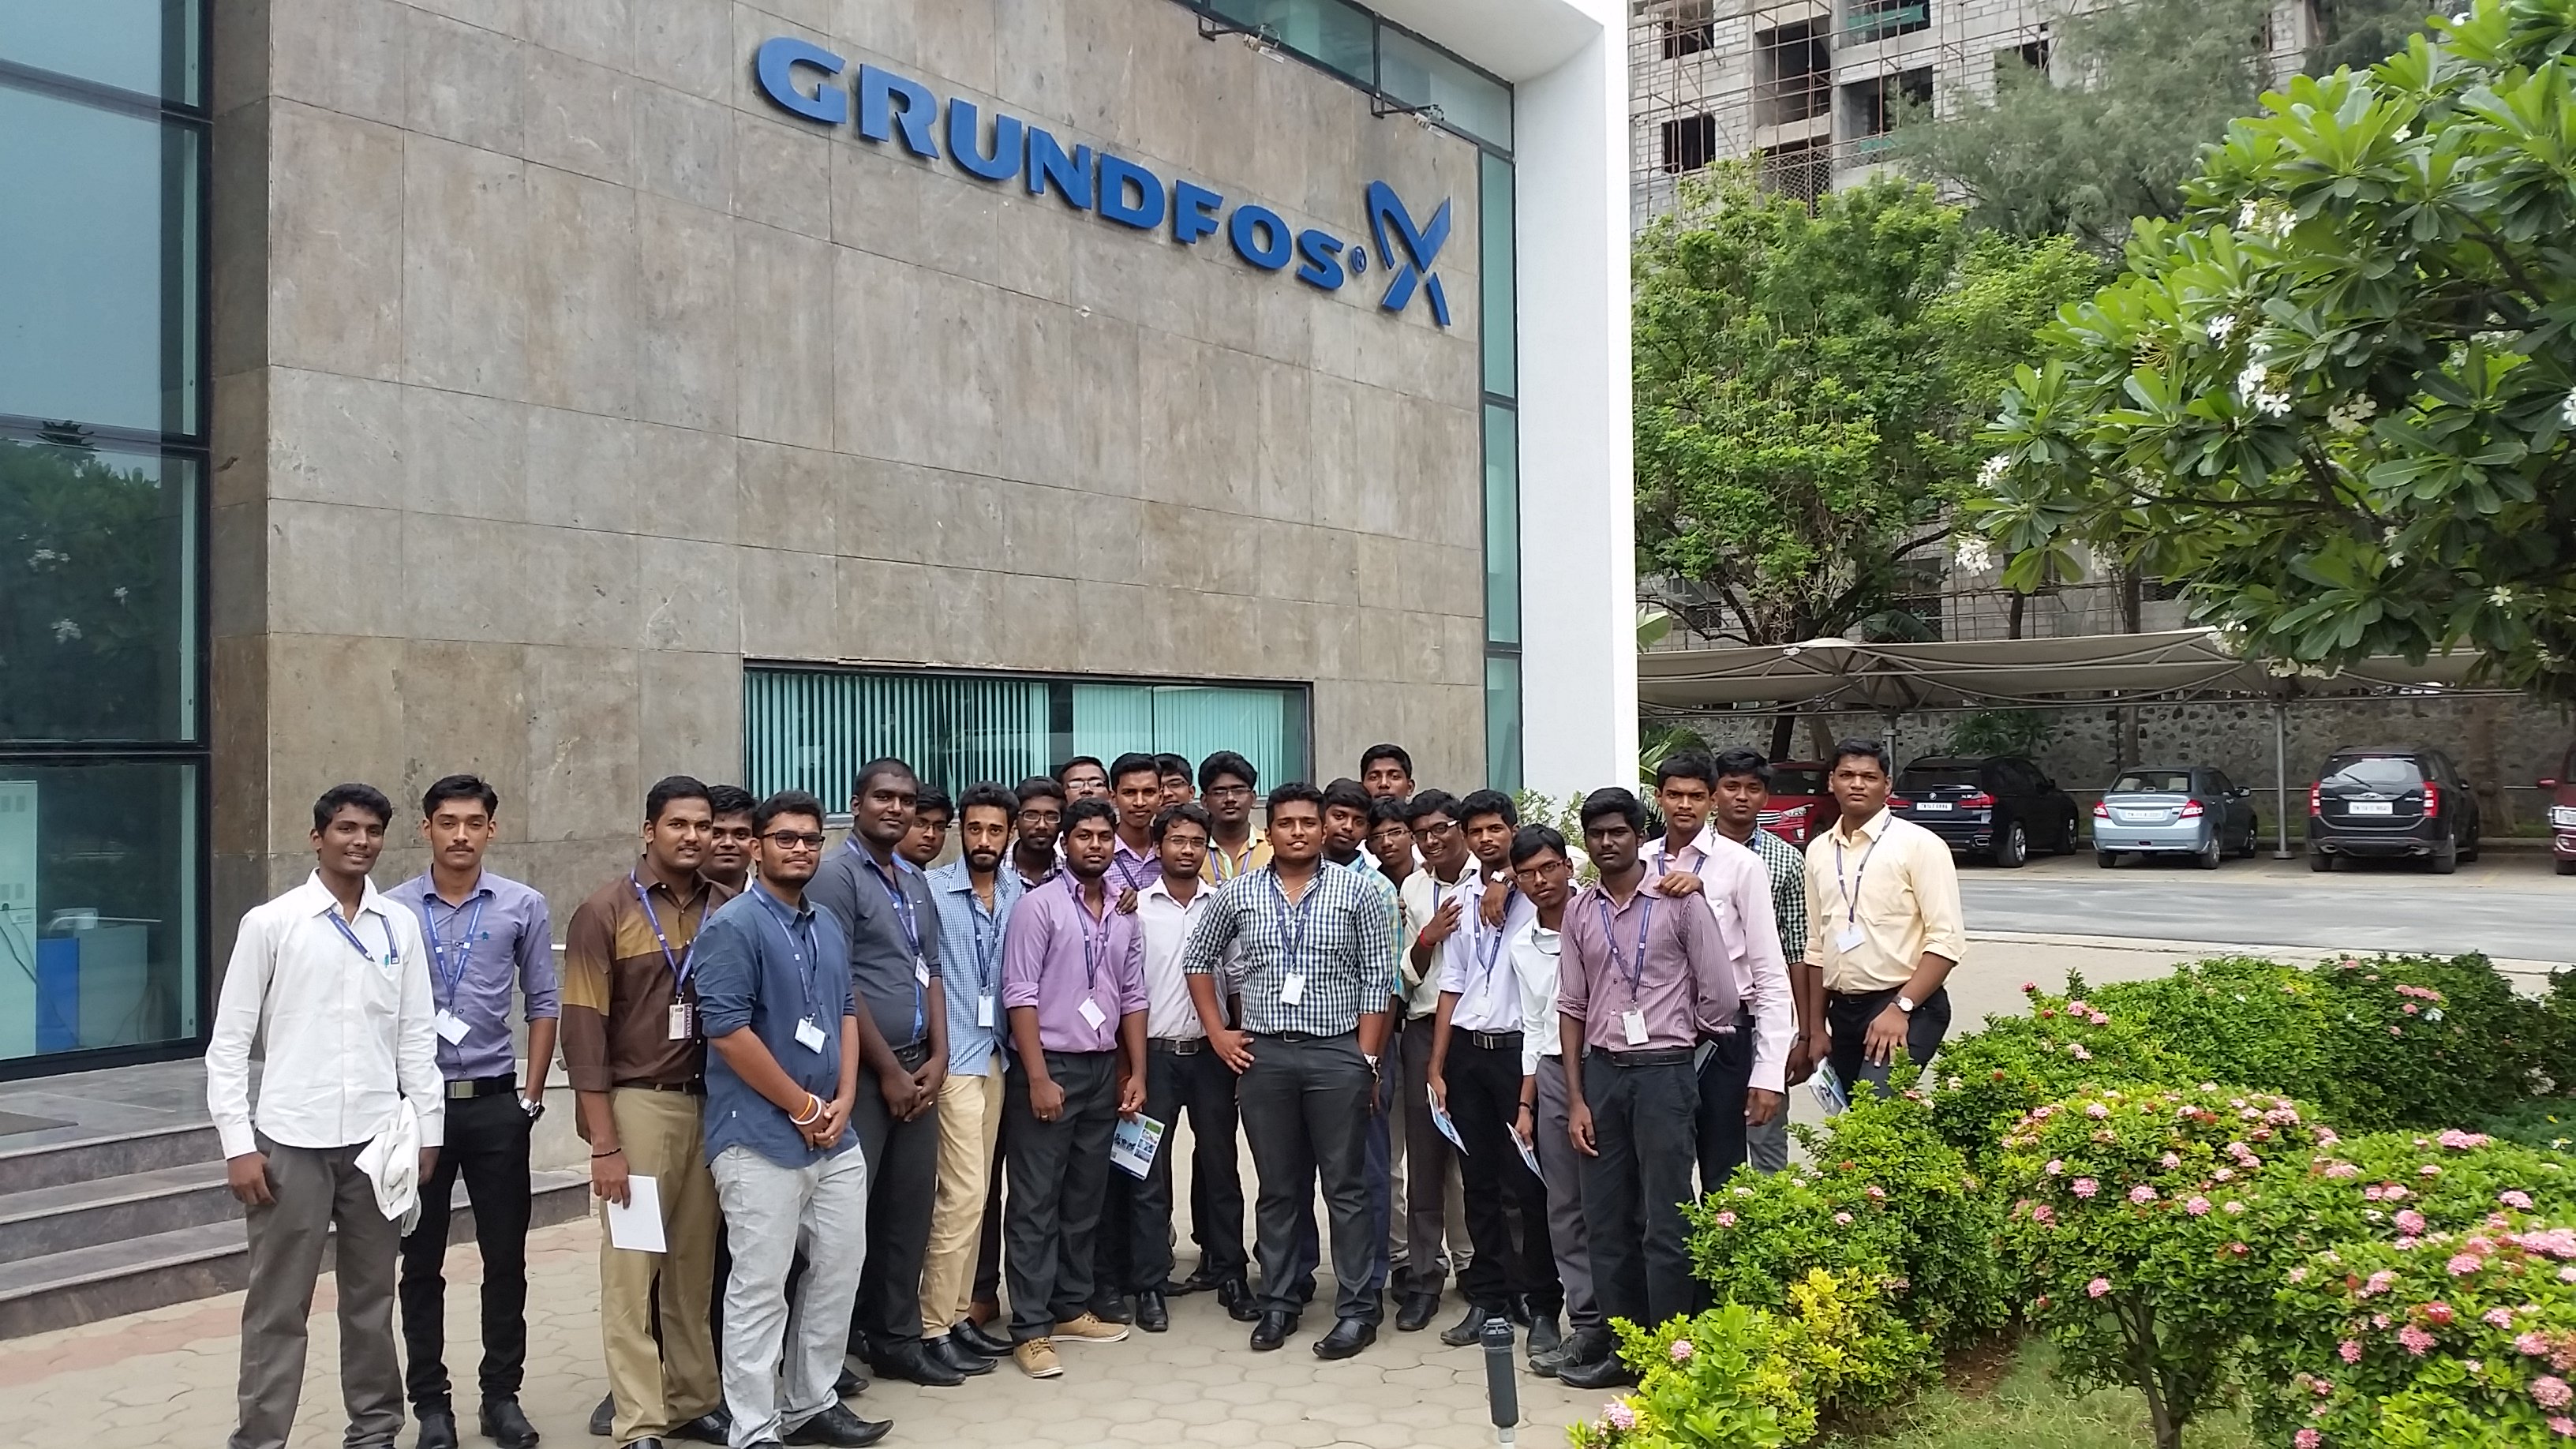 Reception grus Brug for Jeppiaar Institute of Technology (JIT) on Twitter: ""Pump Energy Awareness  Training" conducted by Grundfos Pumps India Pvt Ltd on 24.06.2016 (Friday).  https://t.co/Al36l6shwR" / Twitter